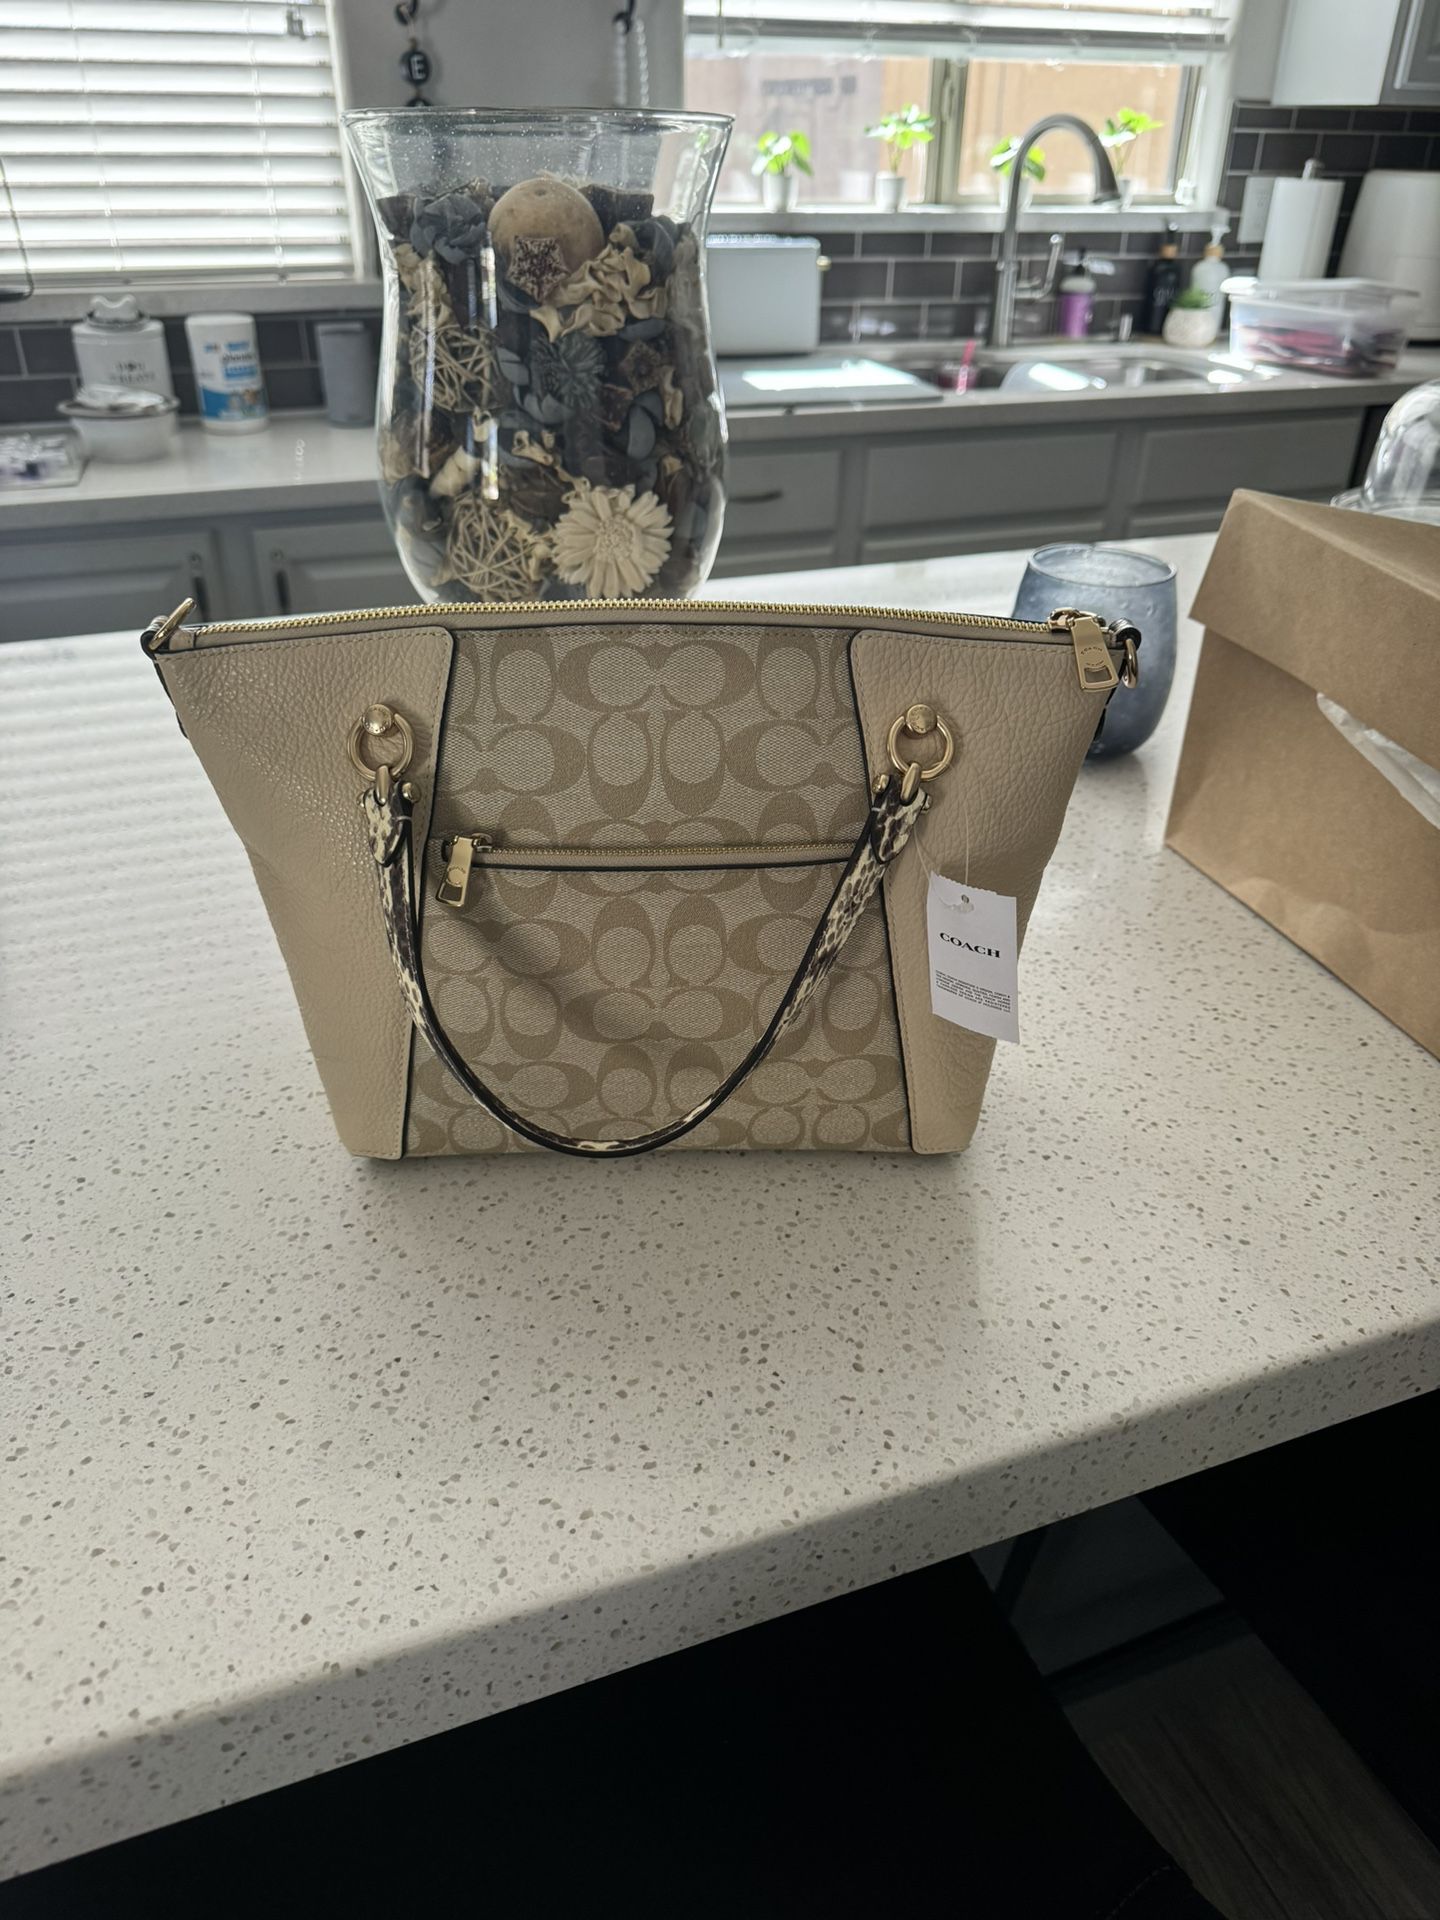 Authentic Coach Brand New Bag